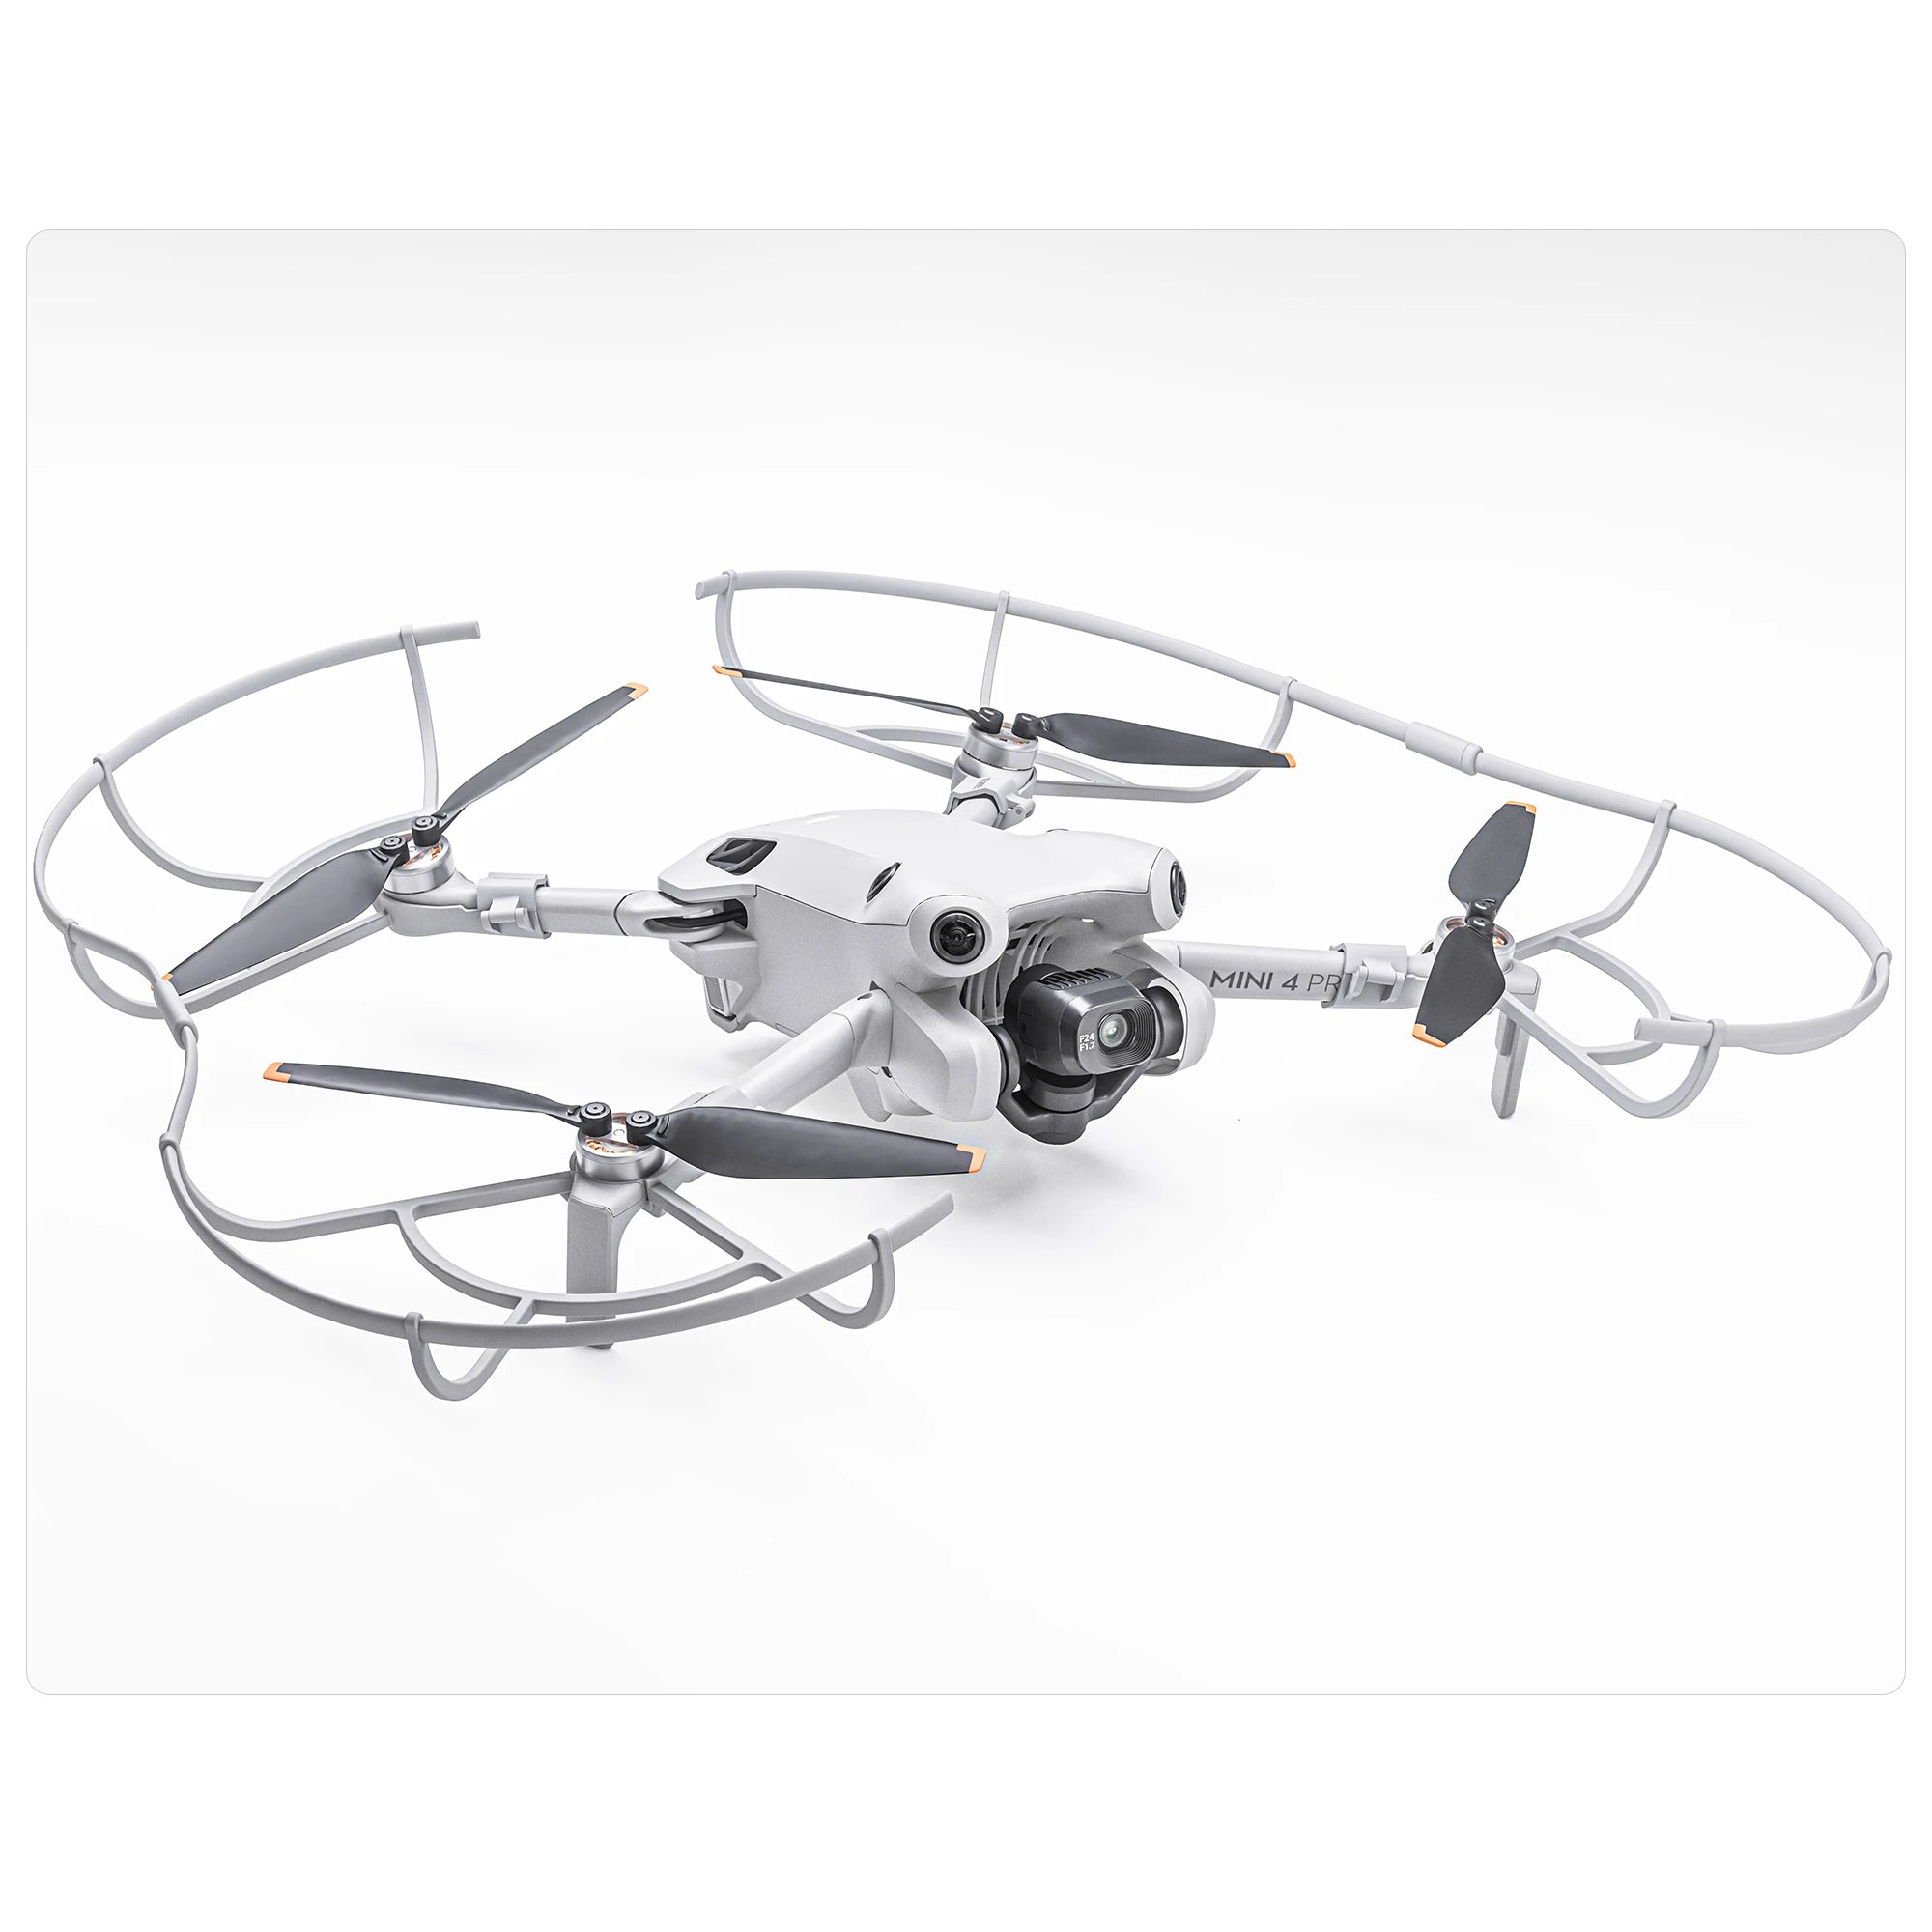 For DJI Mini 4 Pro Propeller Guard, this landing gear features a foldable and quick detachable design . it'